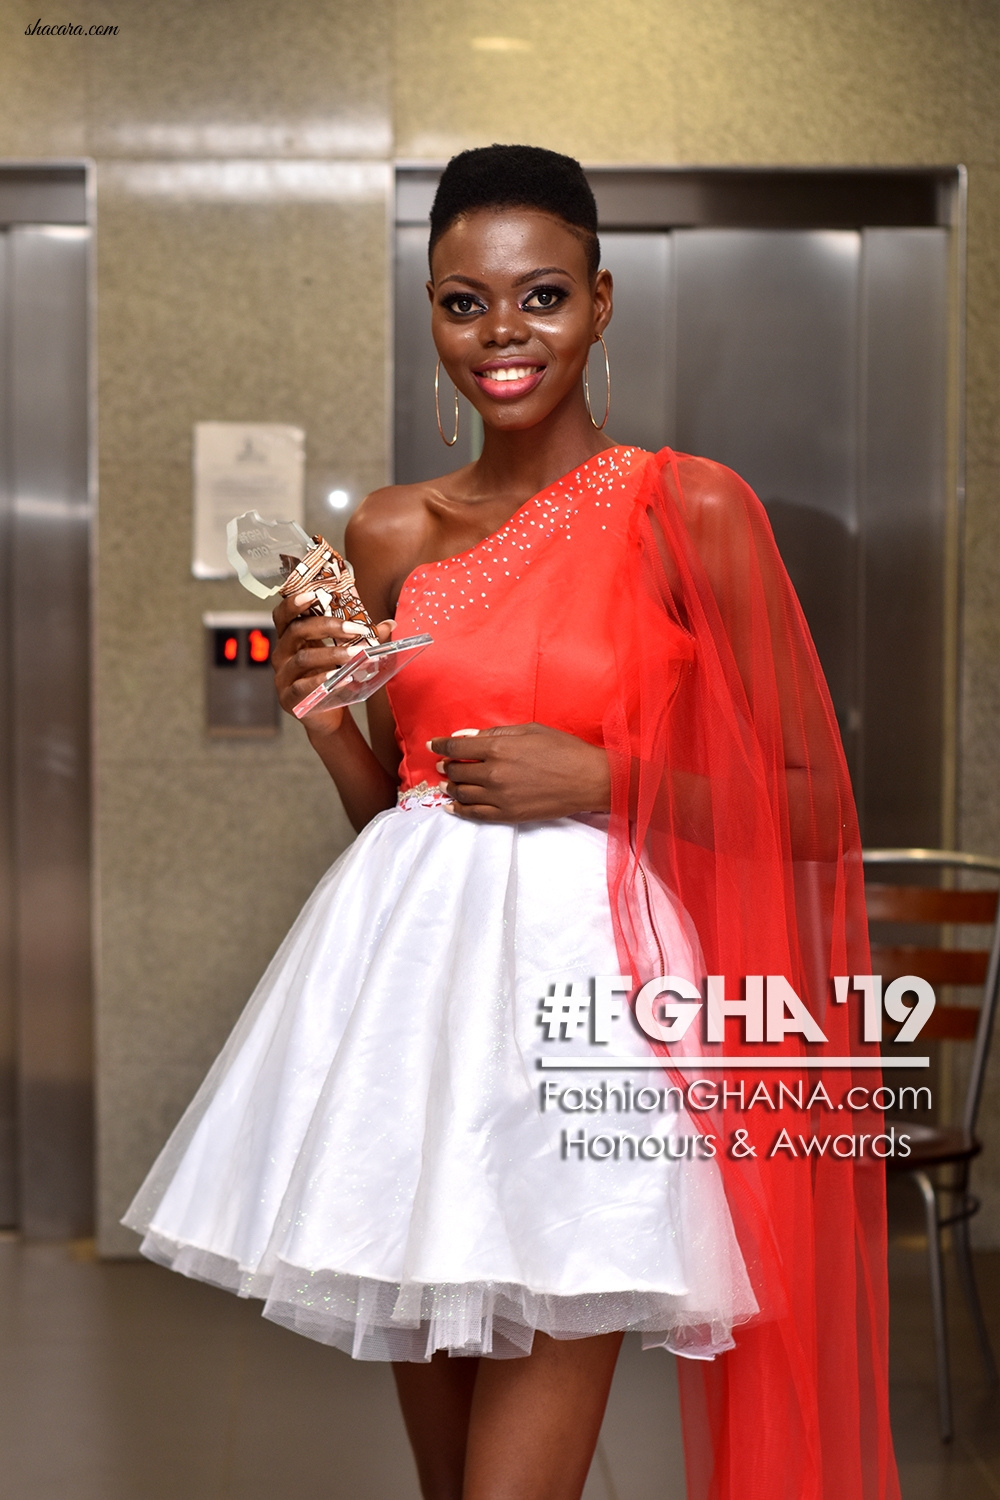 FashionGHANA Wows Gh Fashion Industry With 2019 Awards Night On The Roof Top!